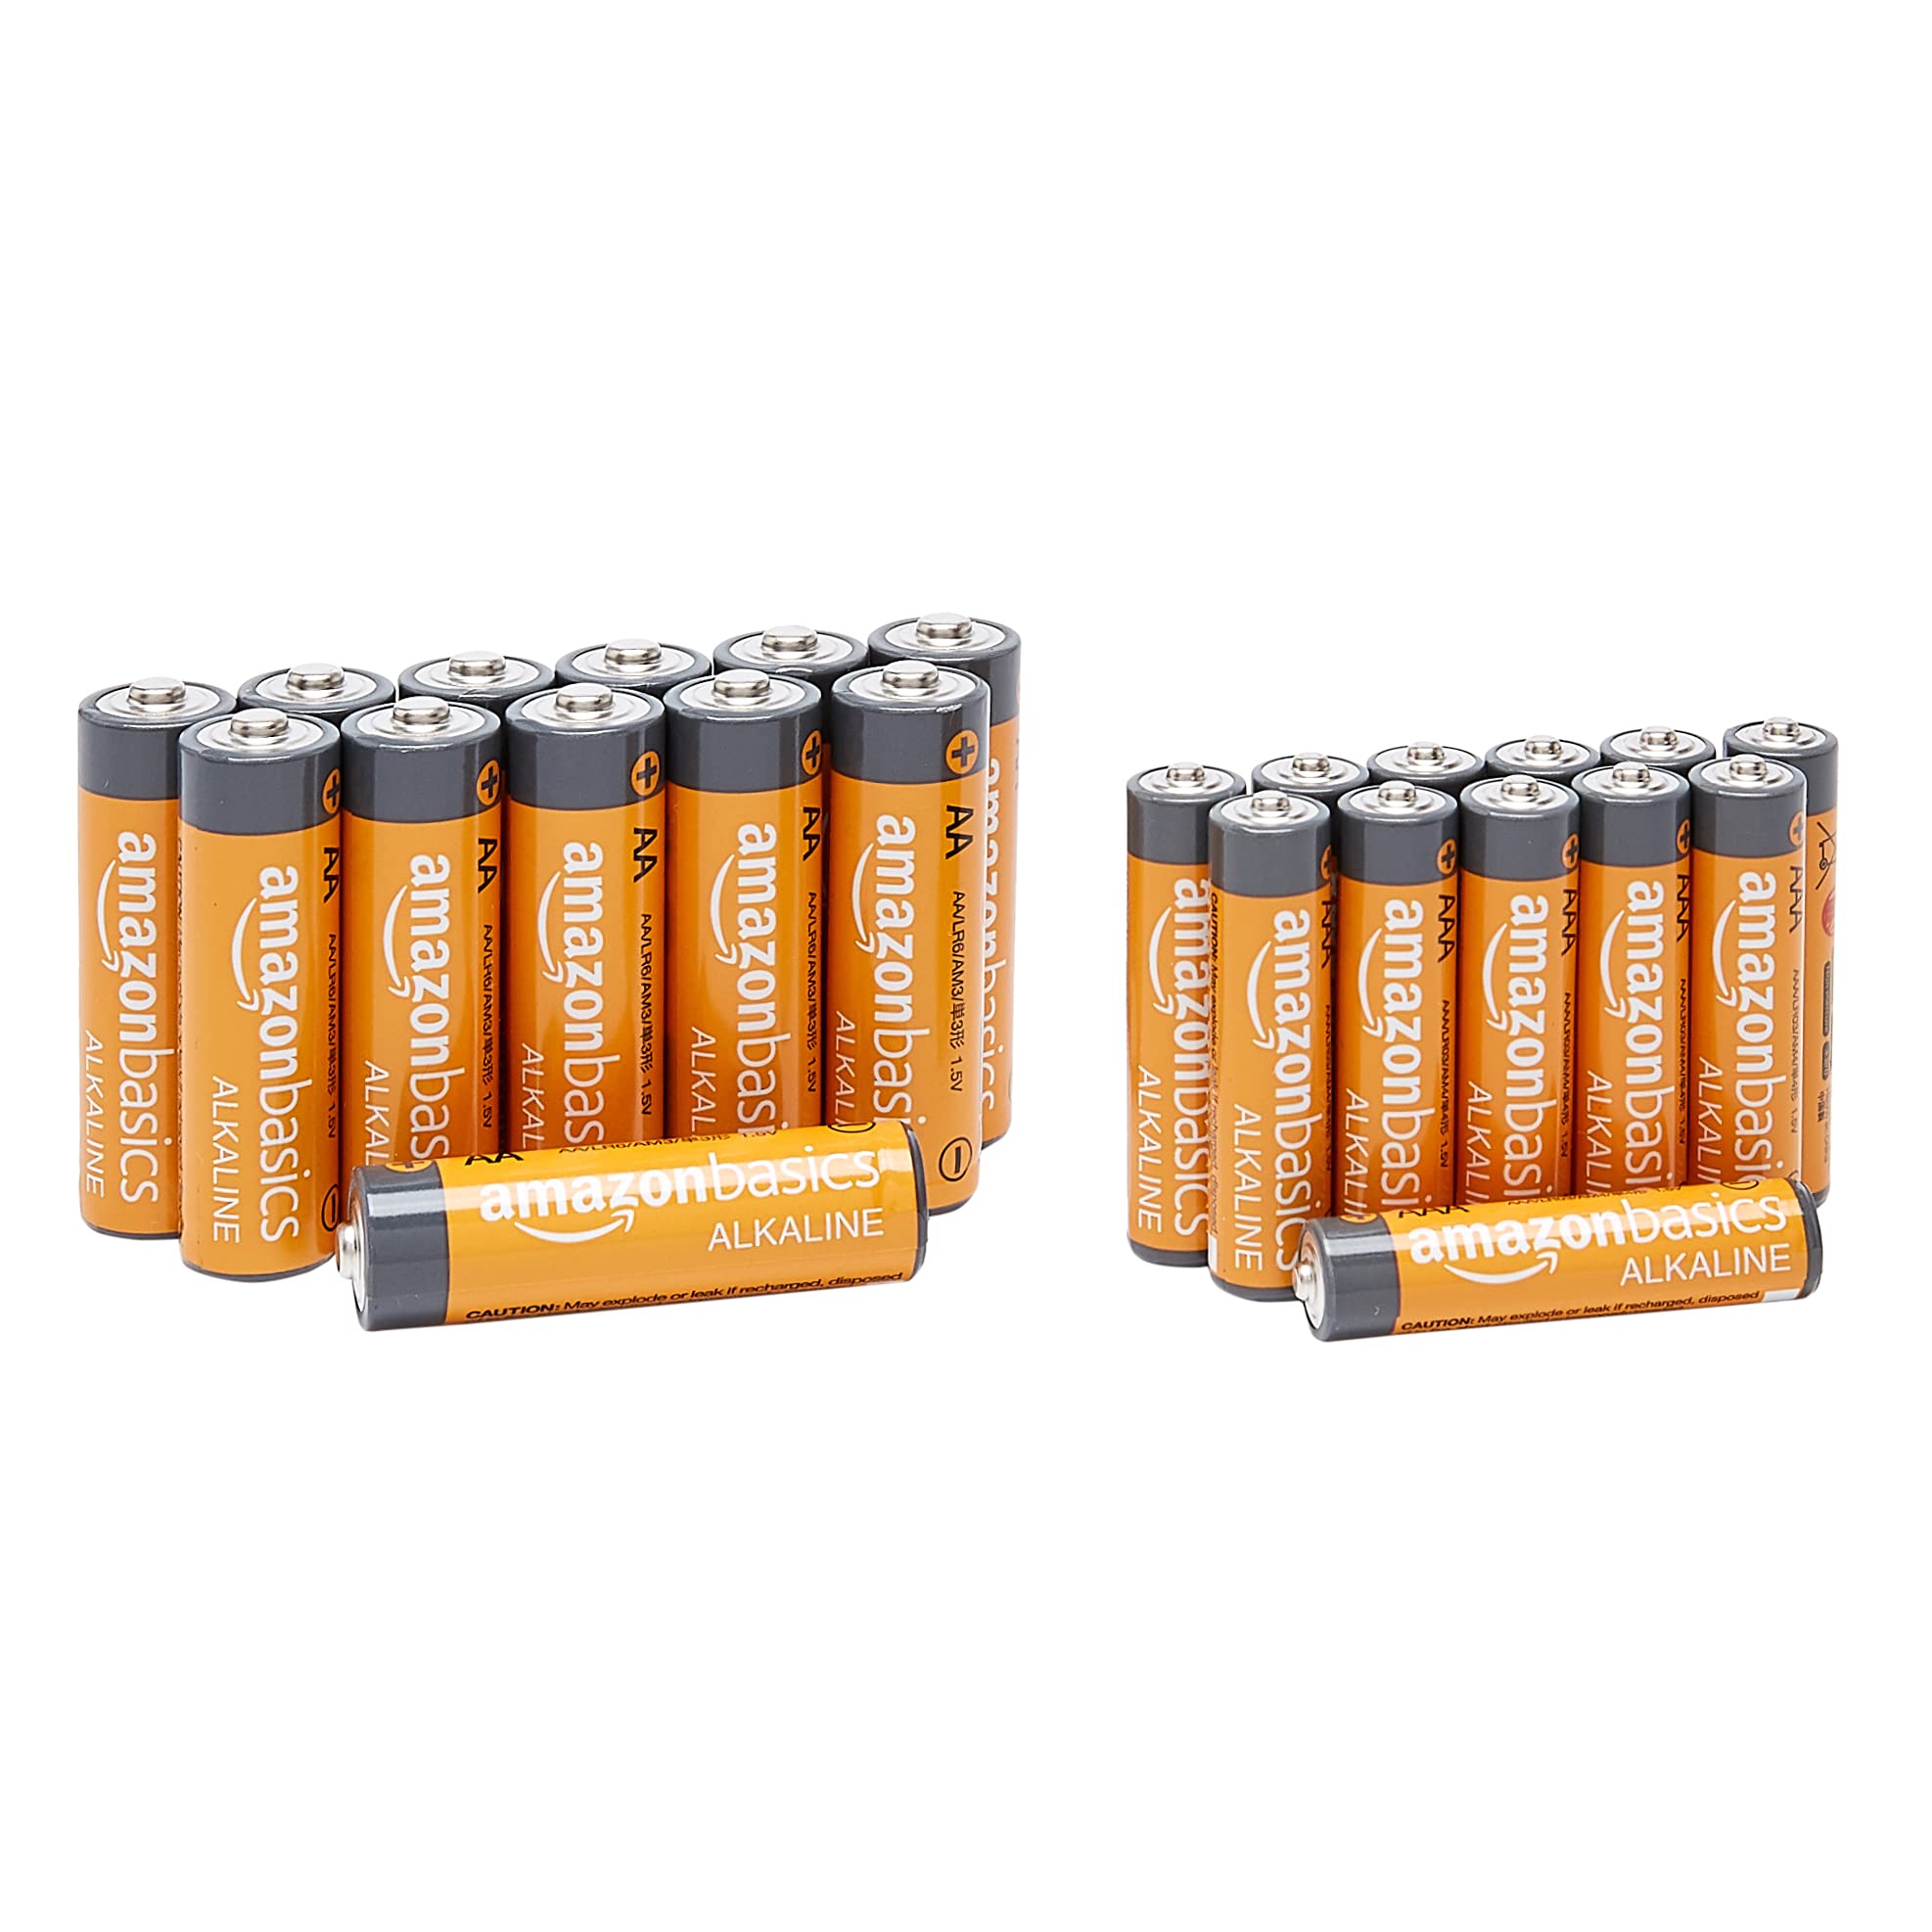 Basics 24 Count AA & AAA High-Performance Batteries Value Pack - 12  Double AA Batteries and 12 Triple AAA Batteries